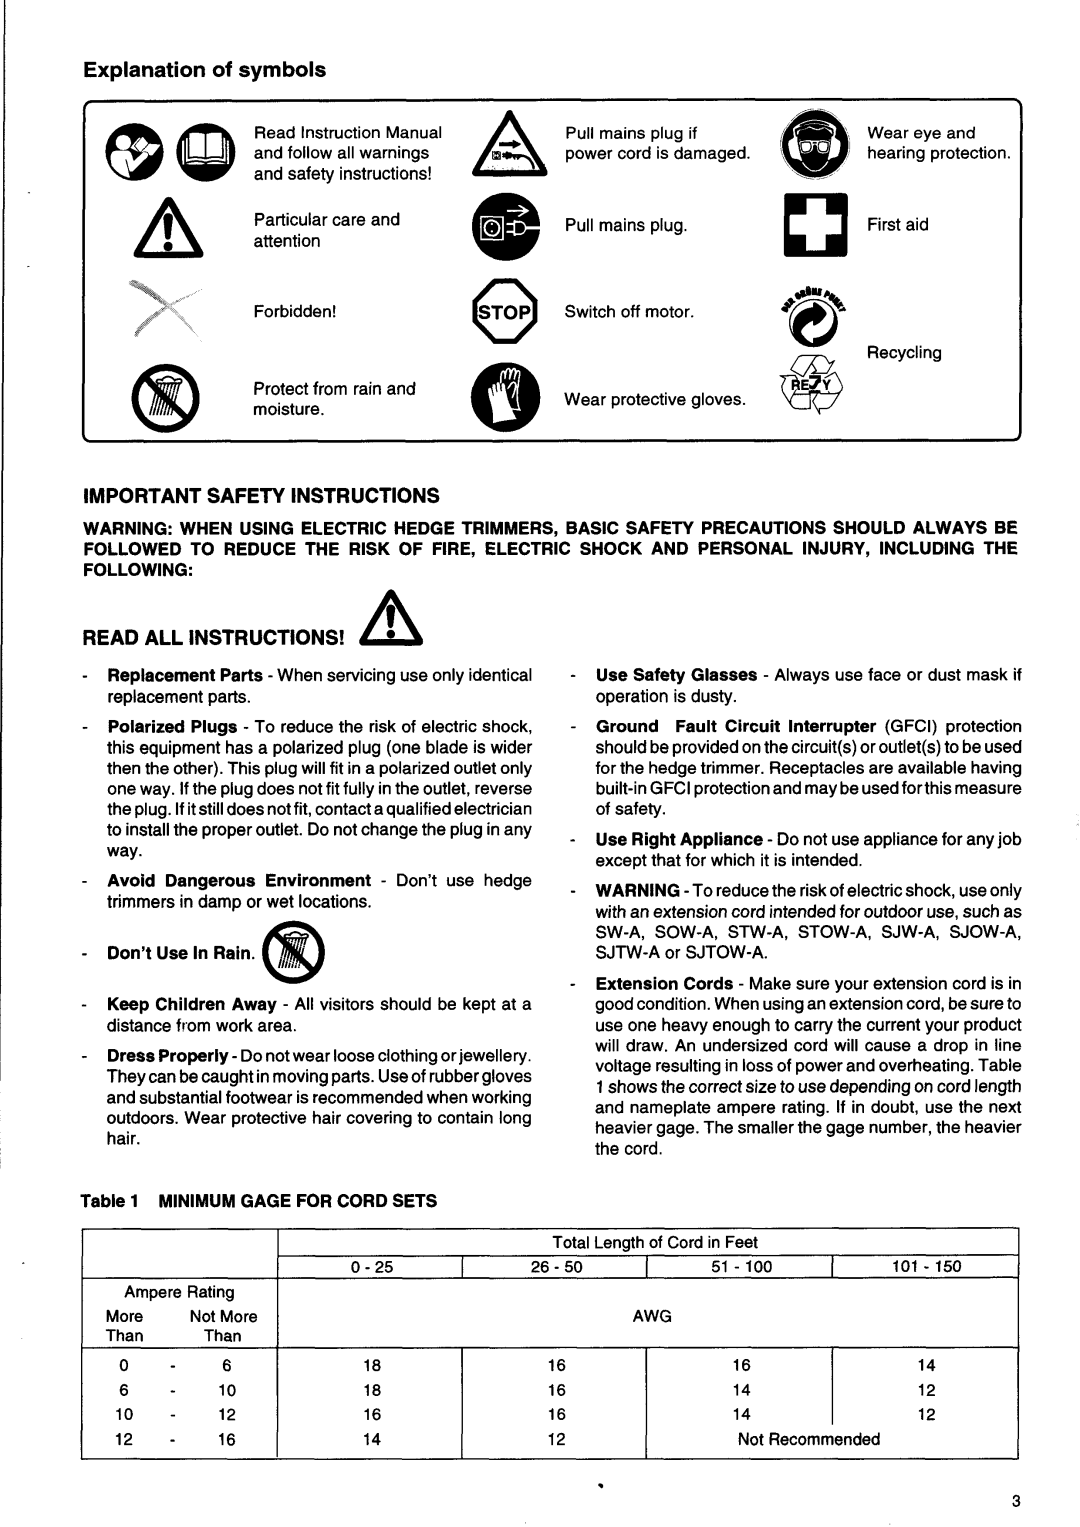 Makita UH6330 Explanationof symbols, Important Safety Instructions, READ ALL INSTRUCTIONS! h, Minimum Gage For Cord Sets 